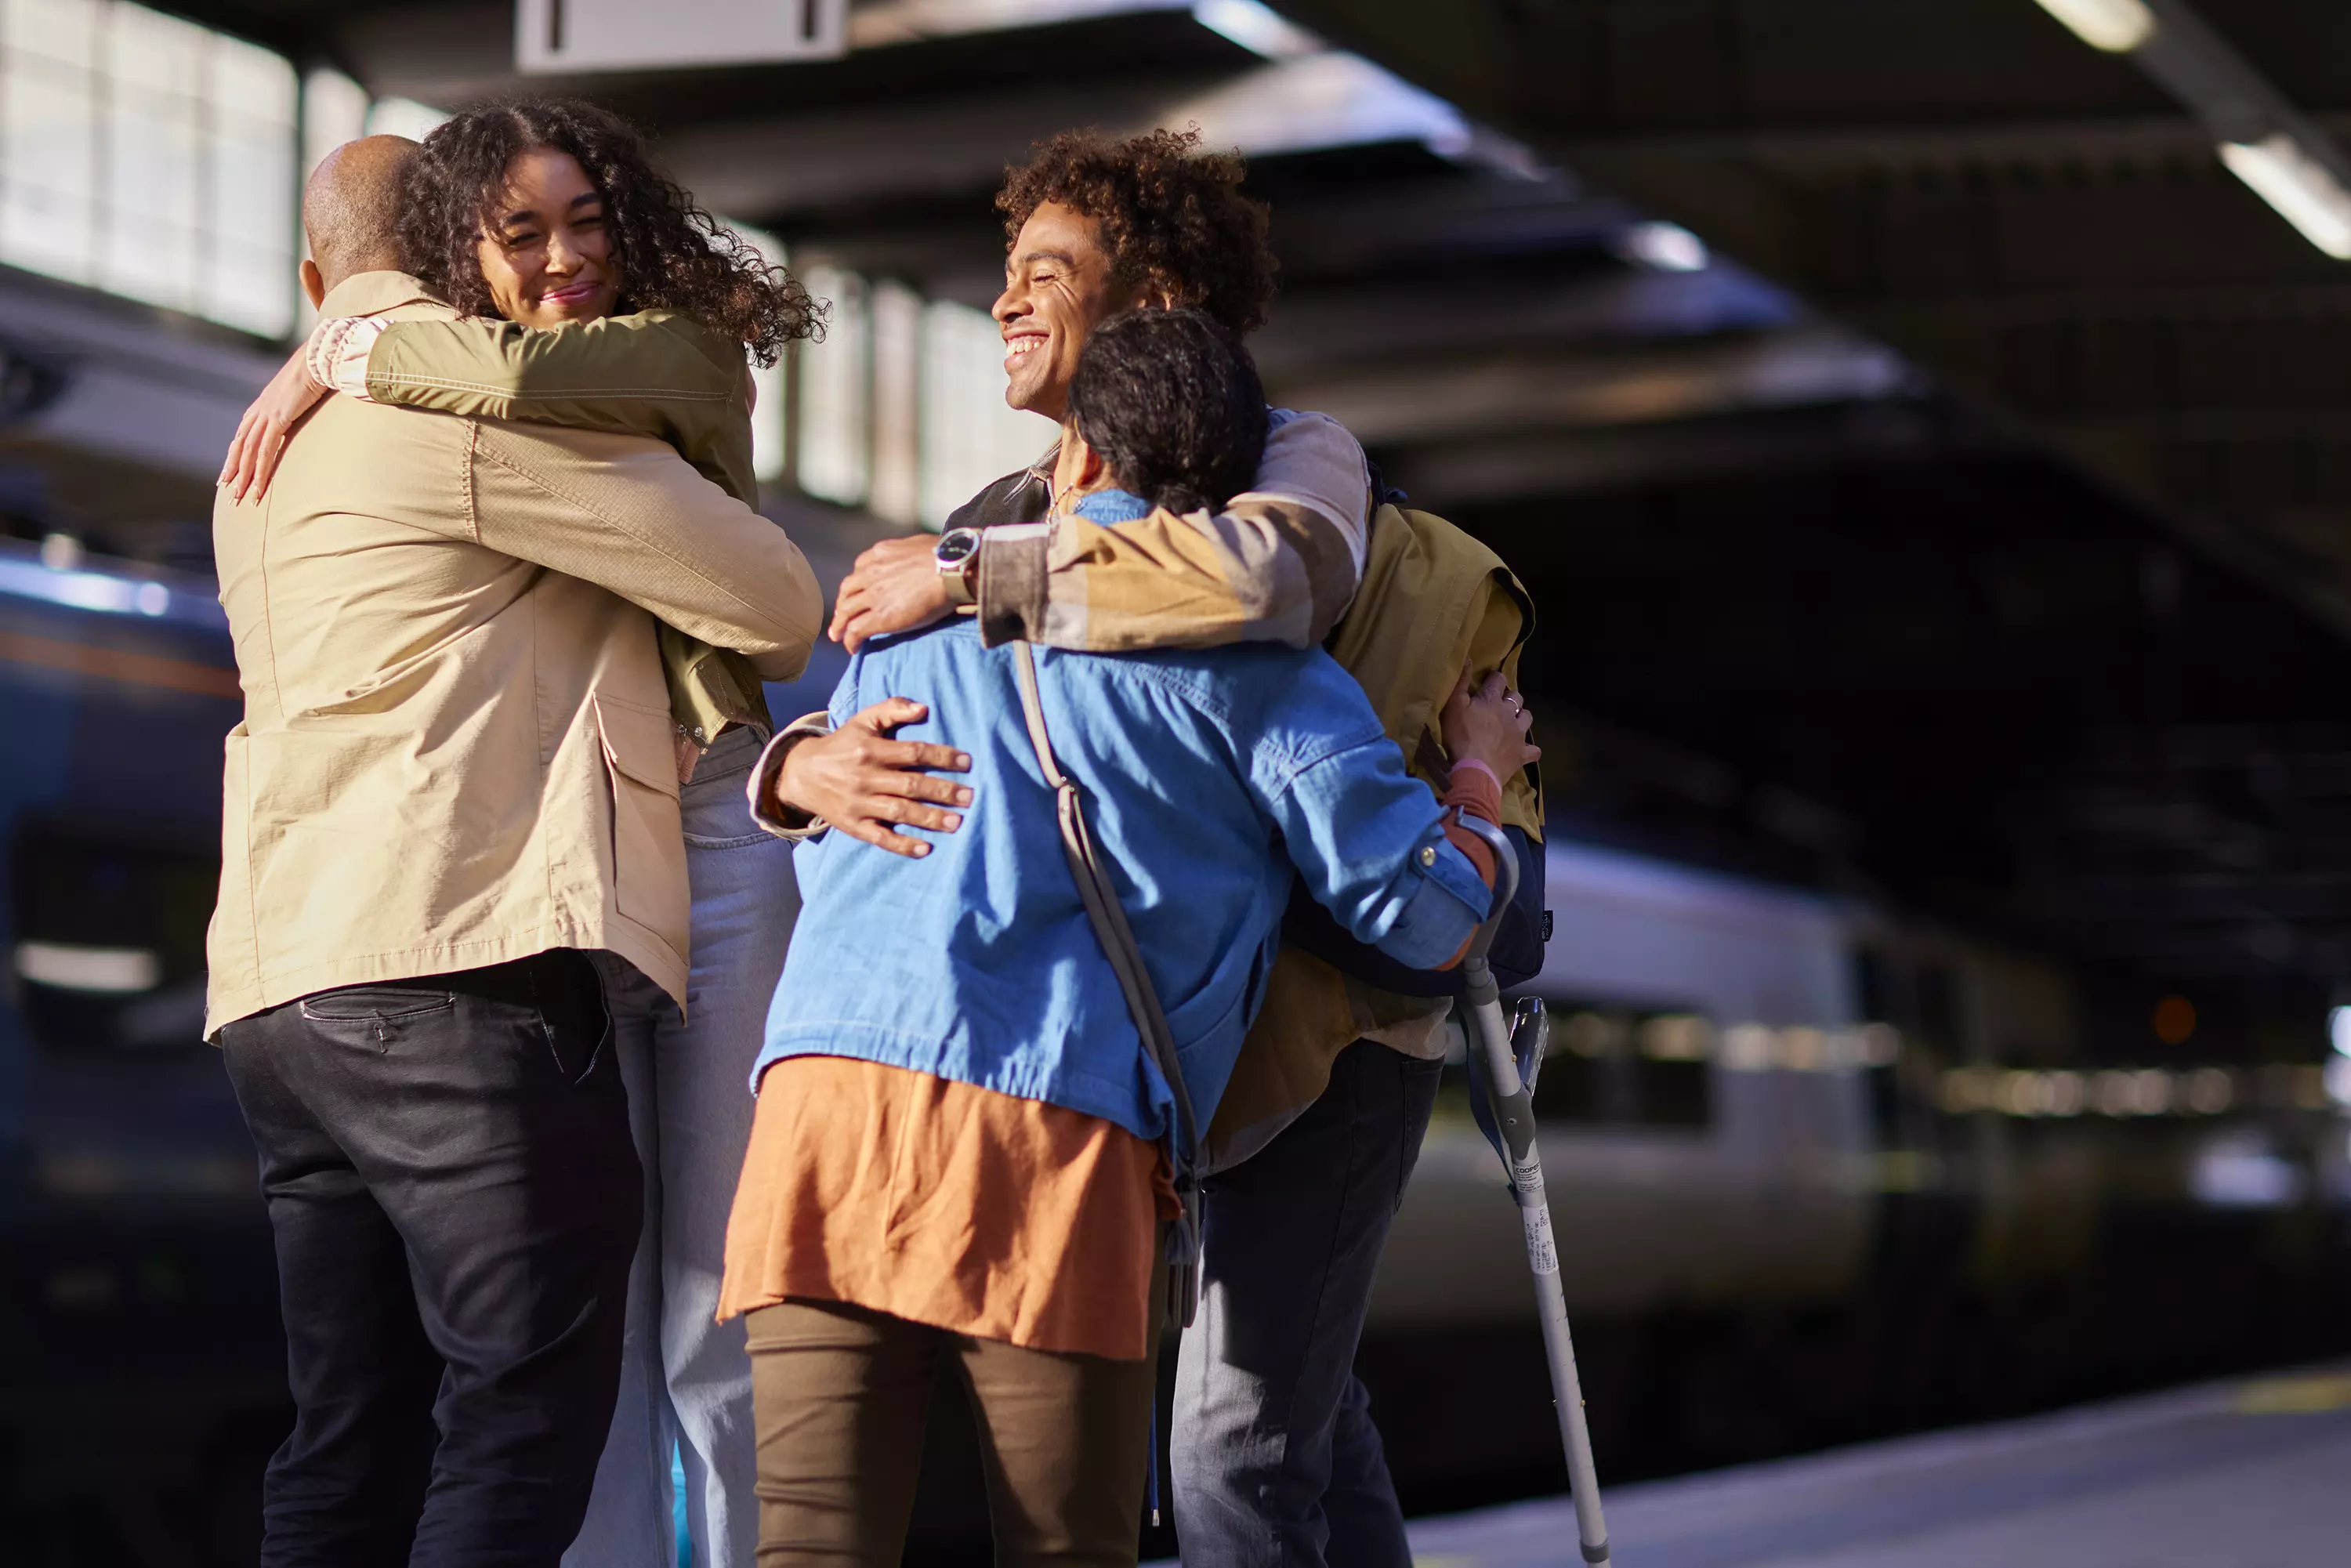 A group of people hugging in a railway station with a train in the background